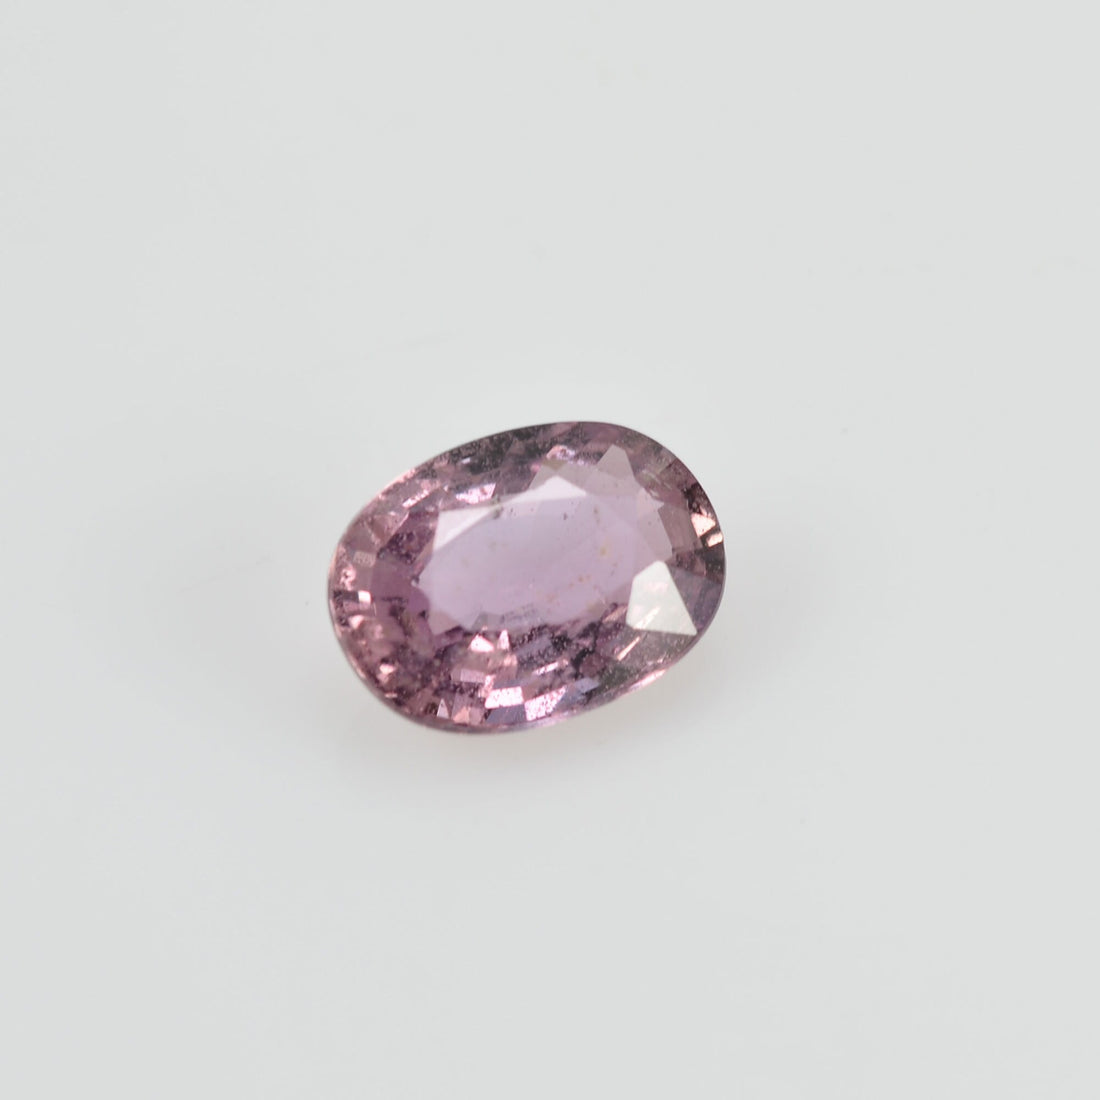 0.87 cts Natural Purple Sapphire Loose Gemstone Oval Cut